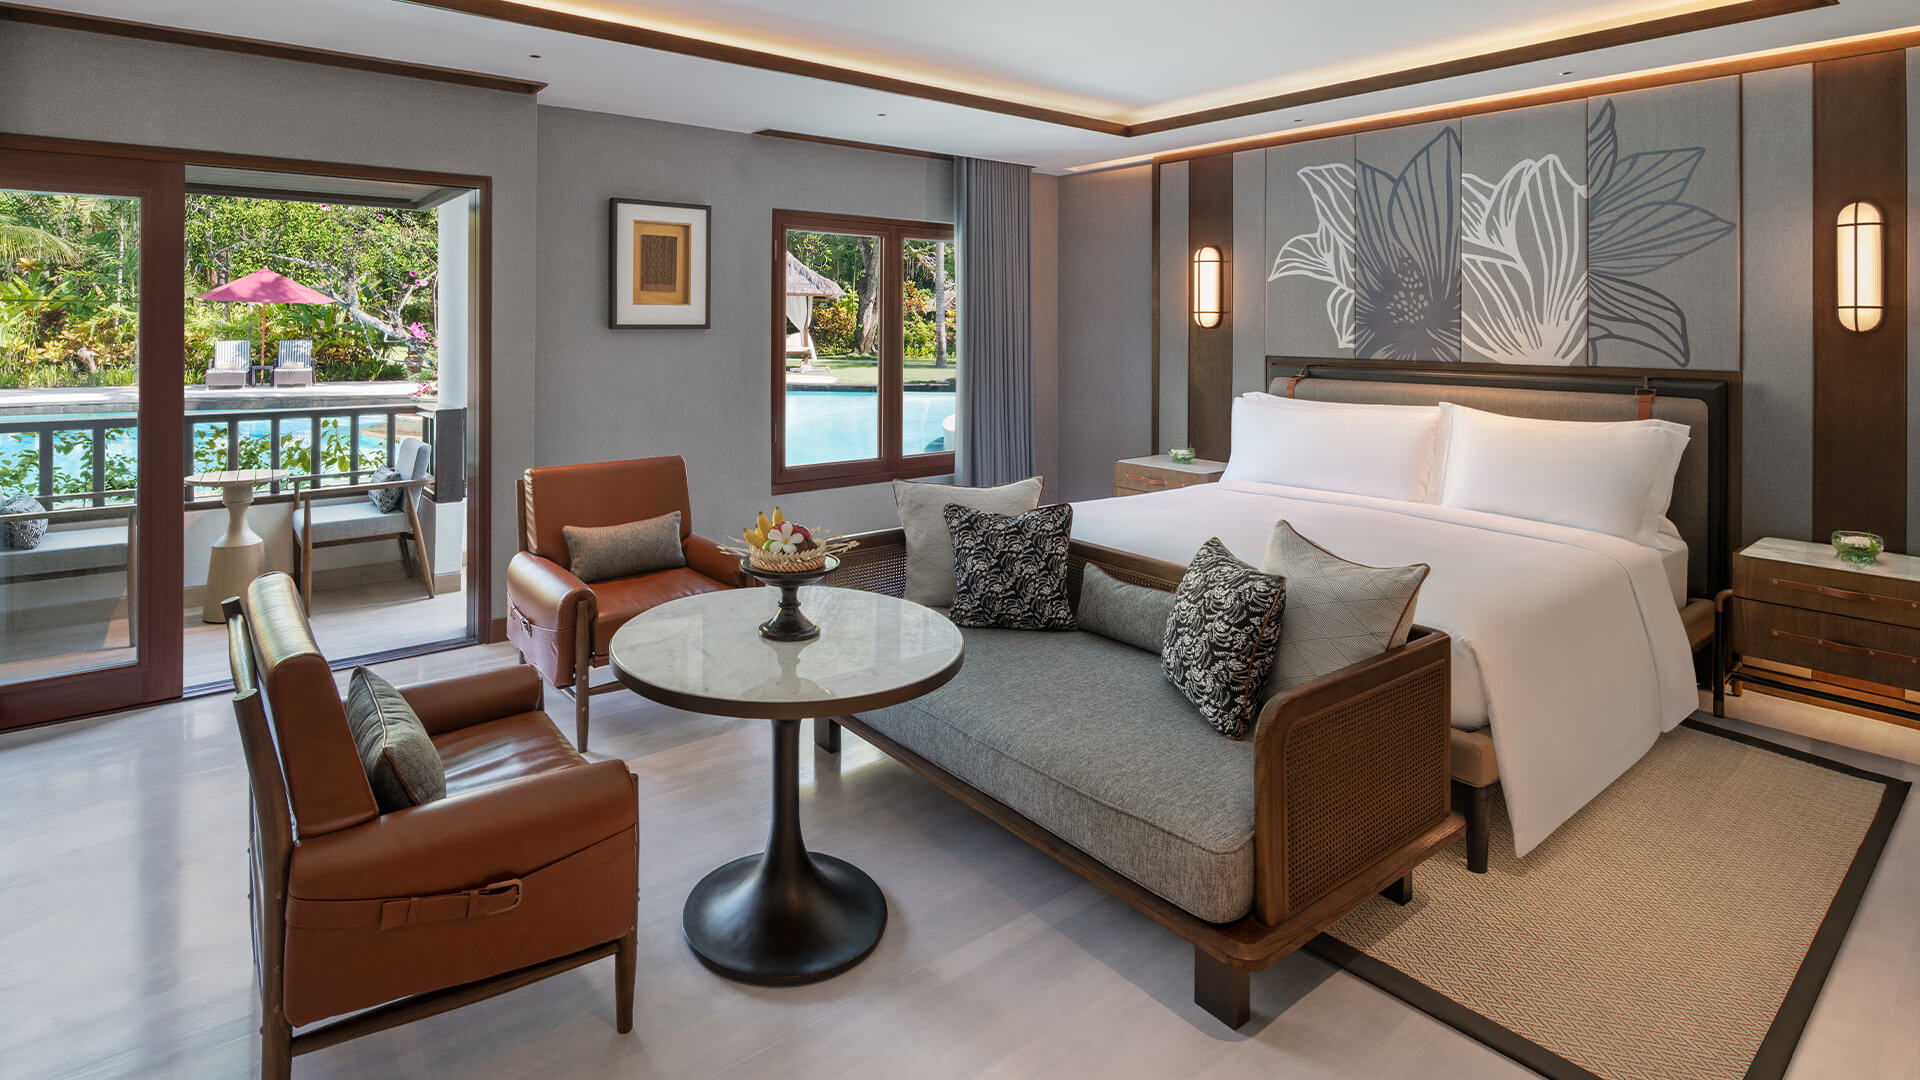 A Luxury studio room at The Laguna Resort showing a large bed, luxury seating with a small table and a view of the balcony and pool through the sliding doors